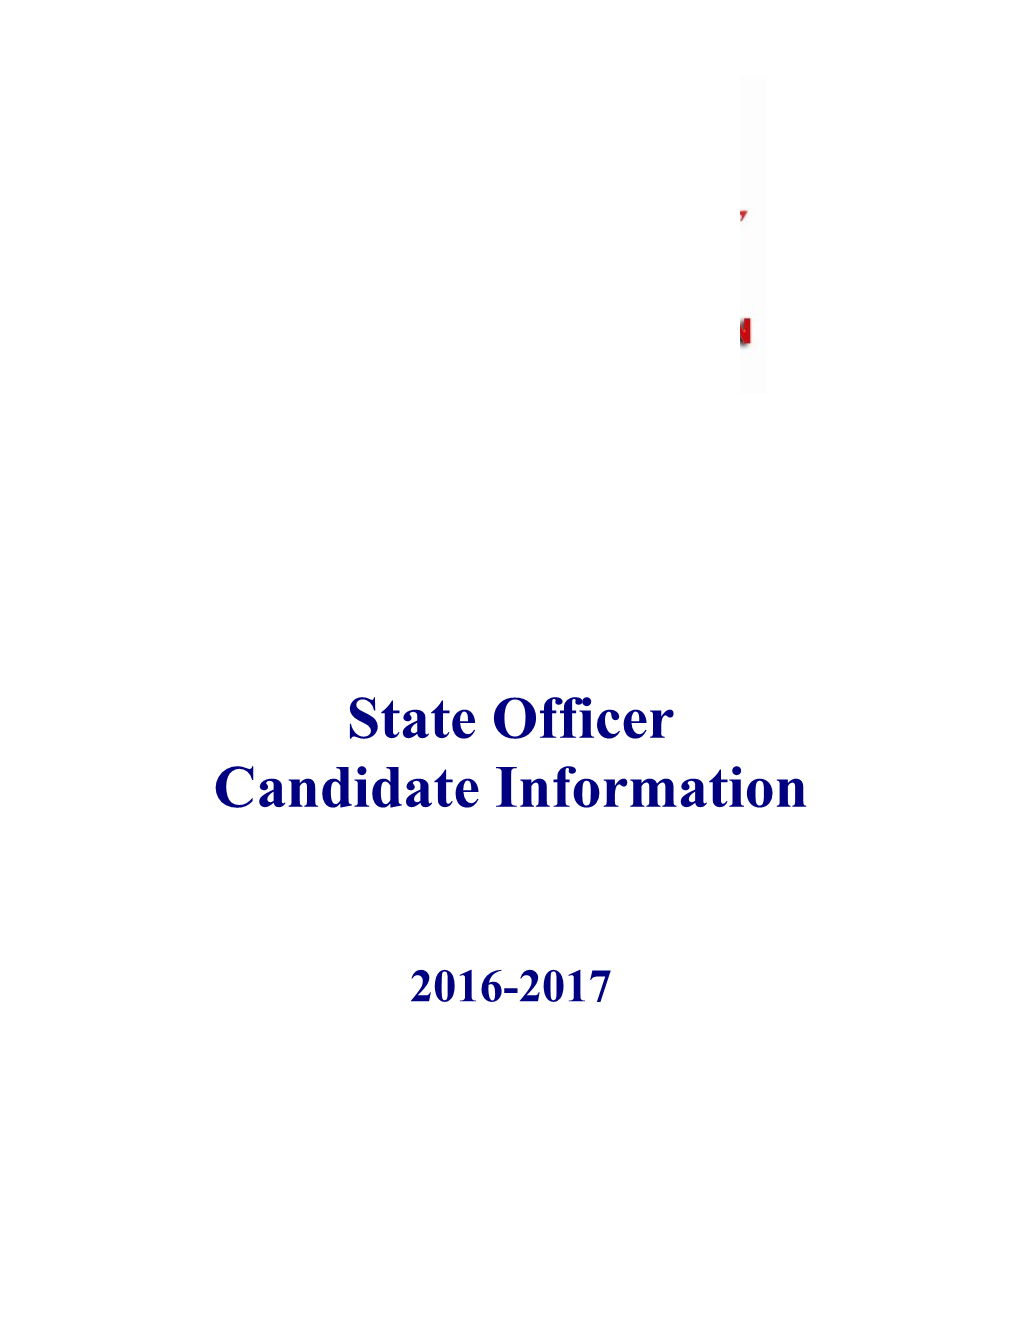 2016-2017 State Officer Candidate Informationpage 1 of 12